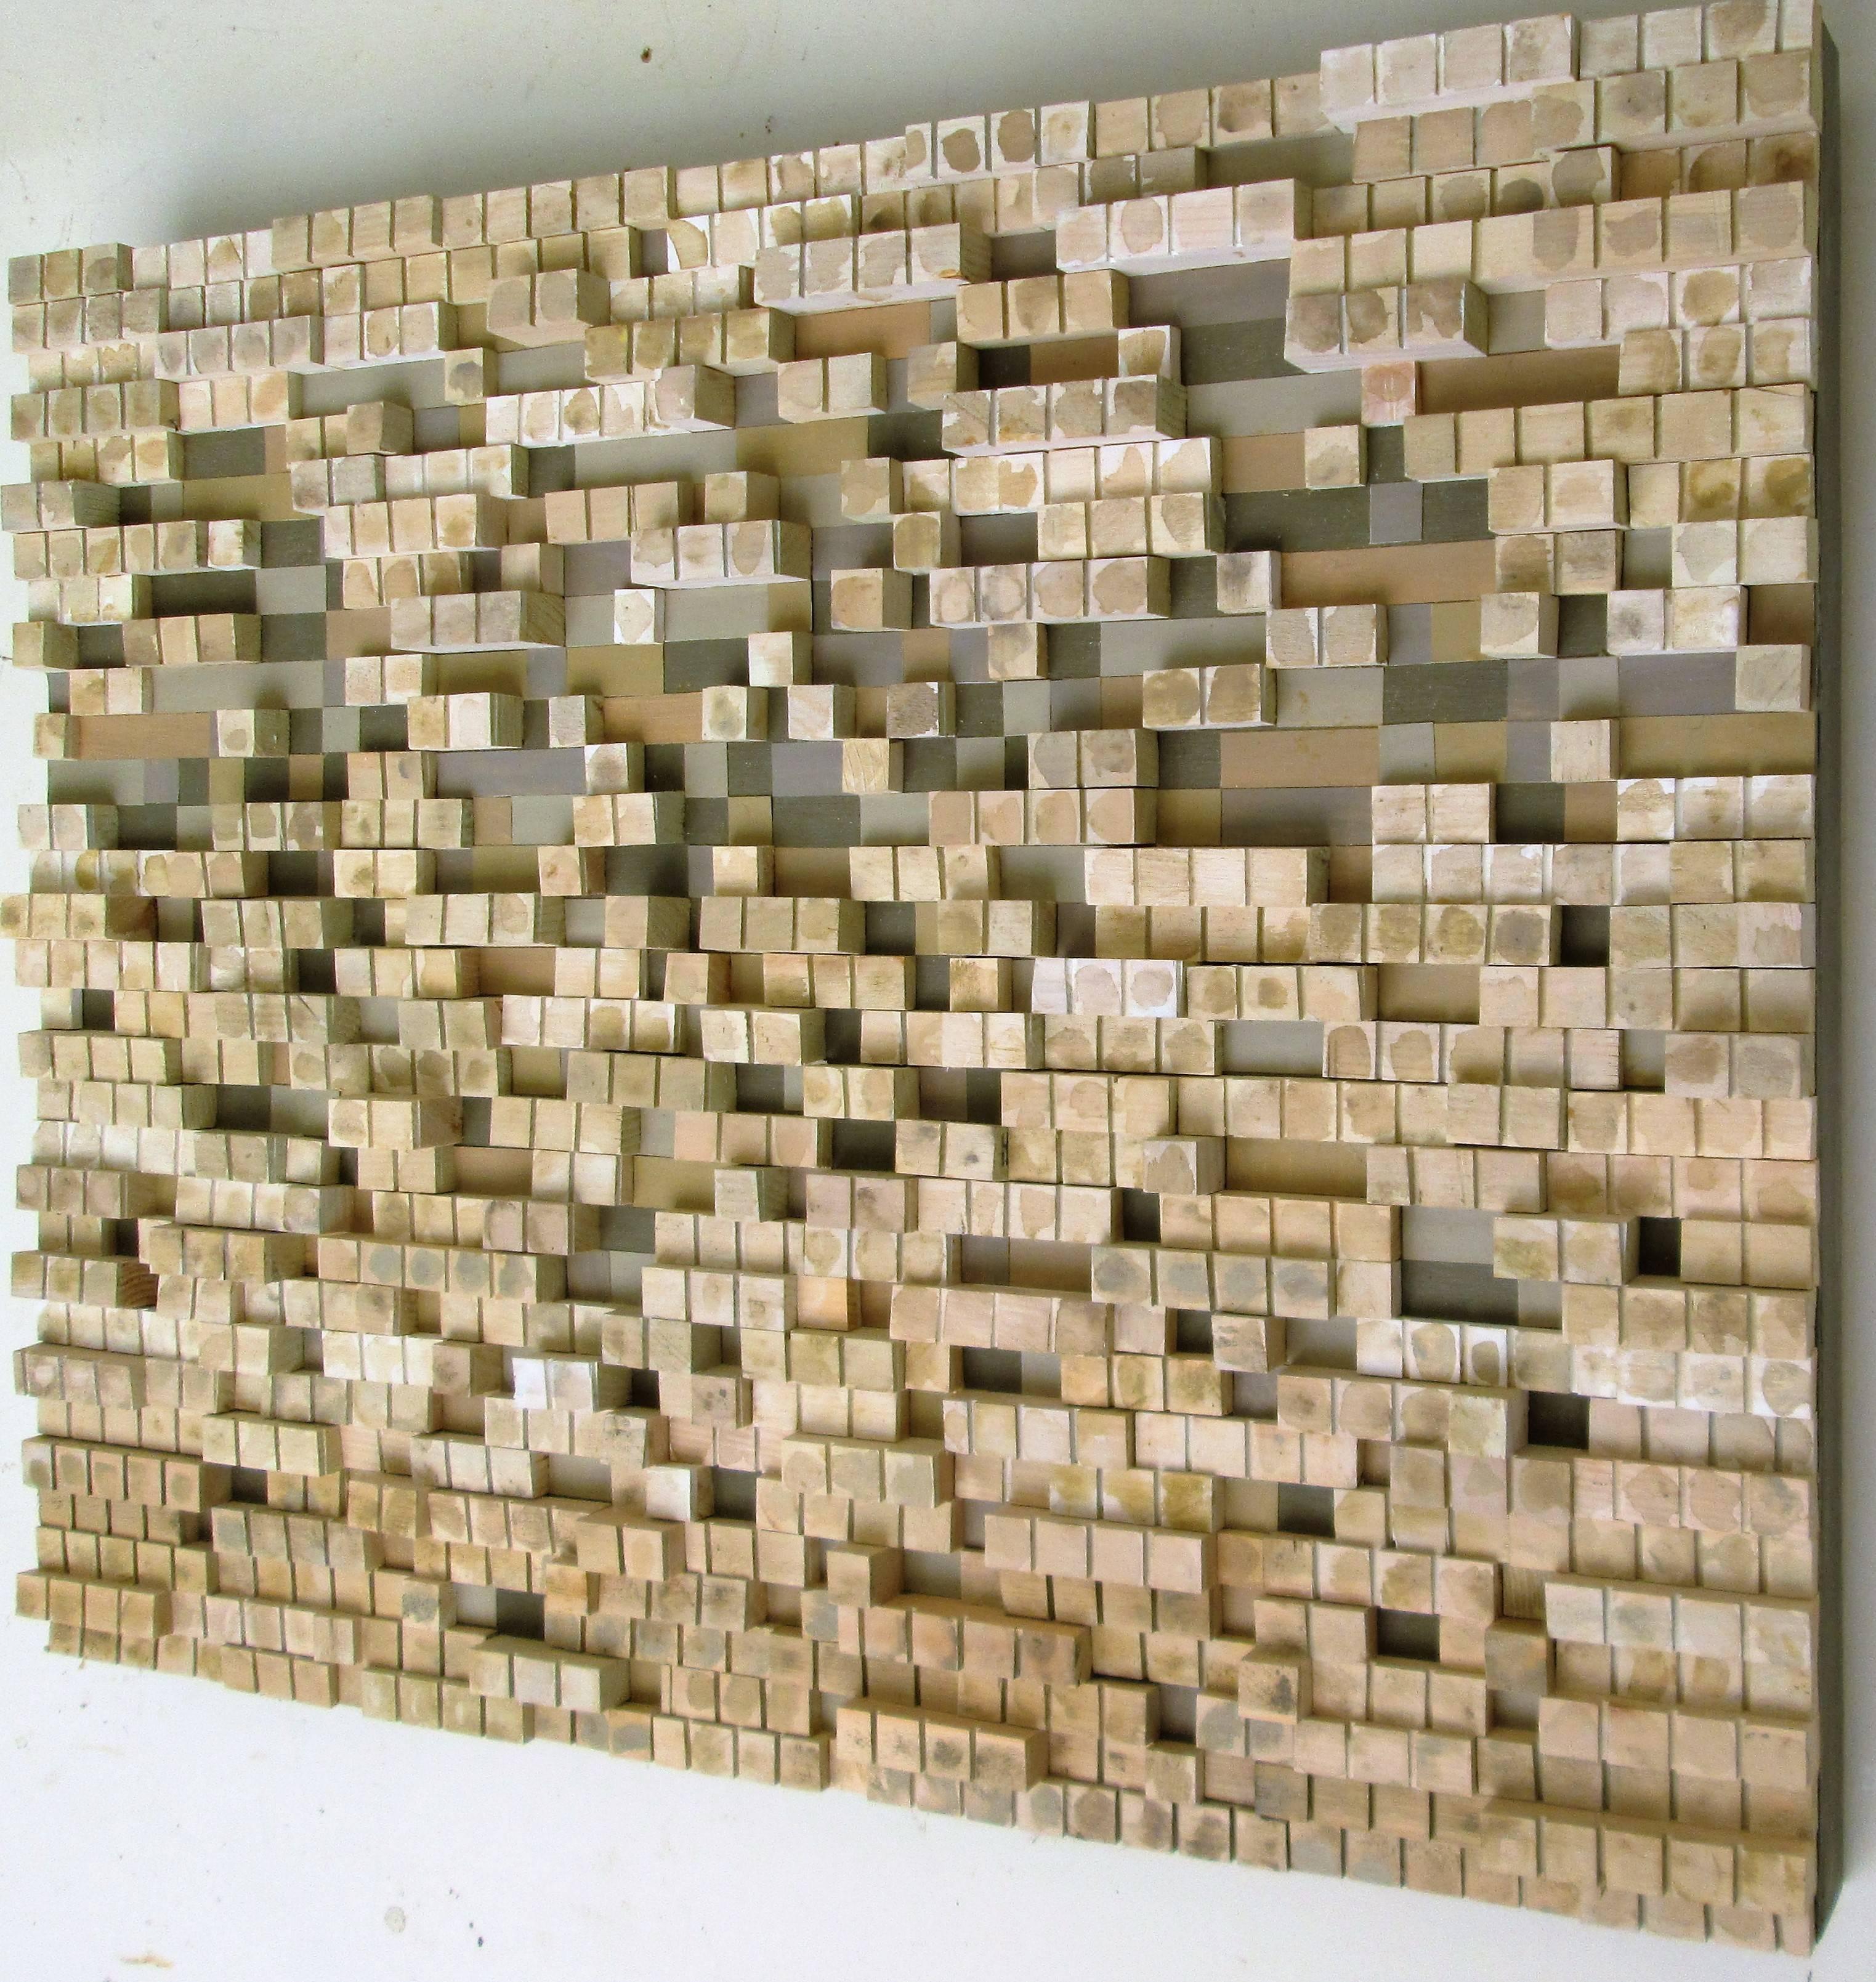 Abstract geometric three dimensional wood wall sculpture in earth toned shades of beige, light brown, and tan
“Migration” by Hudson Valley artist, Stephen Walling, made in 2015
Hand carved wood with acrylic paint on panel  
24 x 30 x 2 inches  
Wire